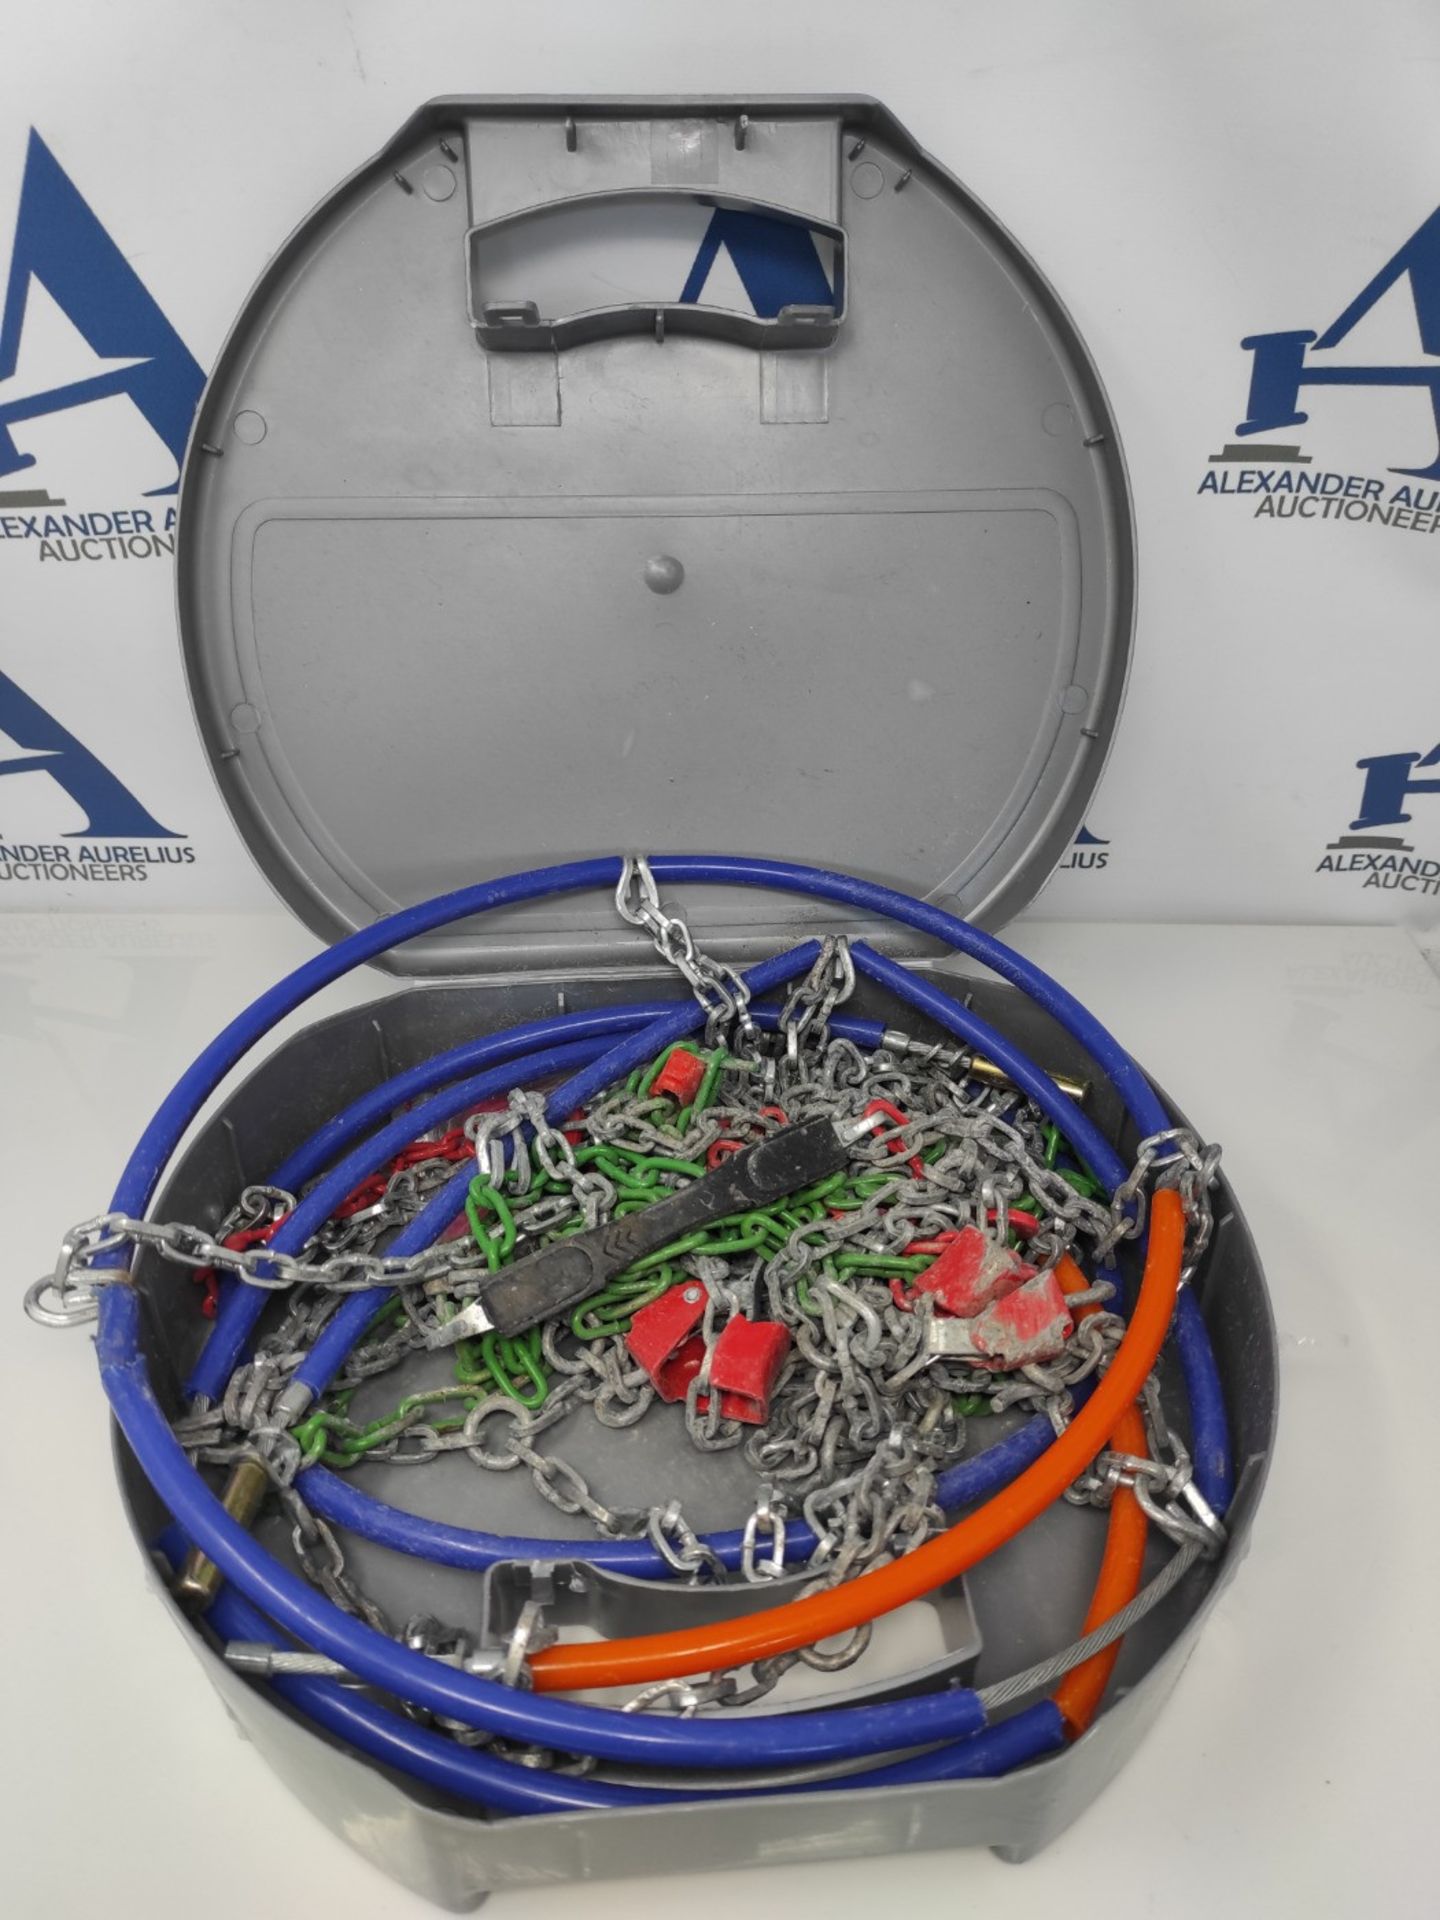 RD9 - Metal snow chains, mm, size No. 90, 2 pieces, including gloves. - Image 3 of 3